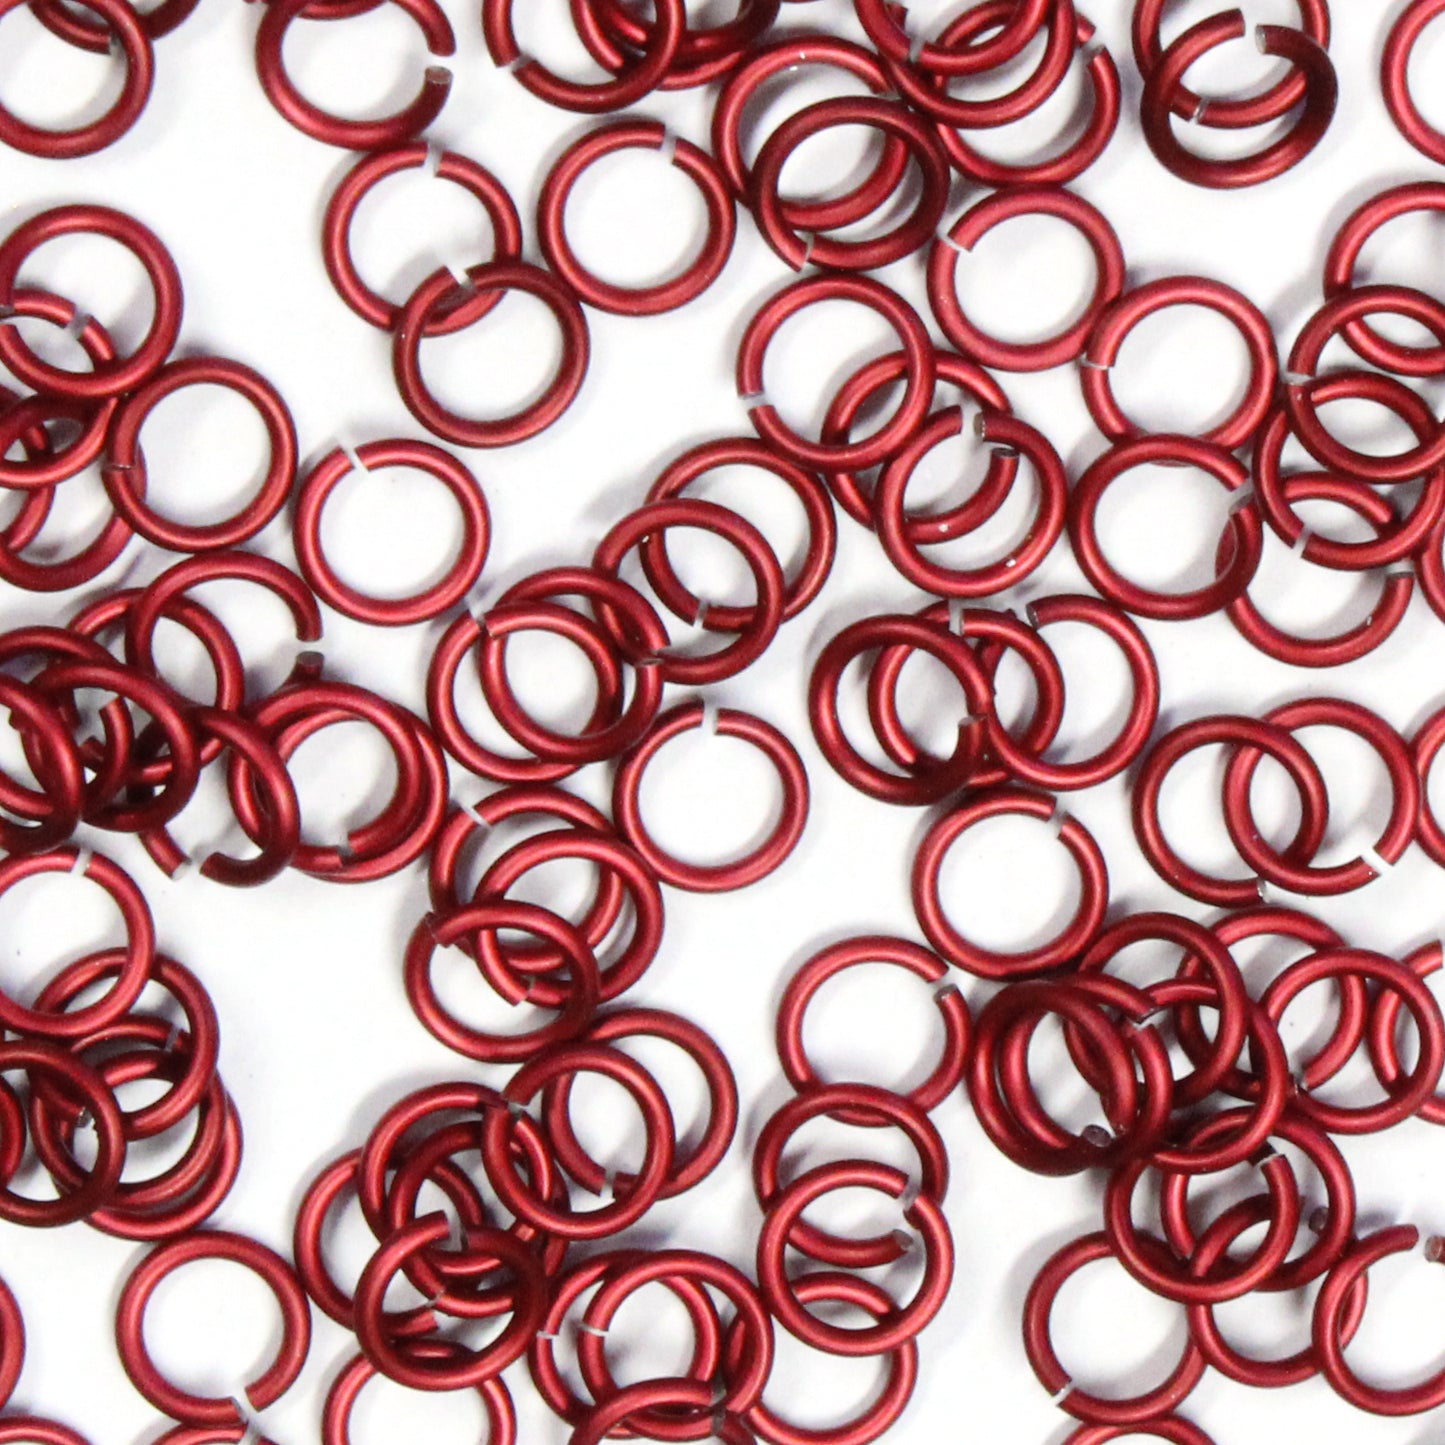 MATTE RED / 4mm 18 GA AWG Jump Rings / 5 Gram Pack (approx 150) / sawcut round open anodized aluminum